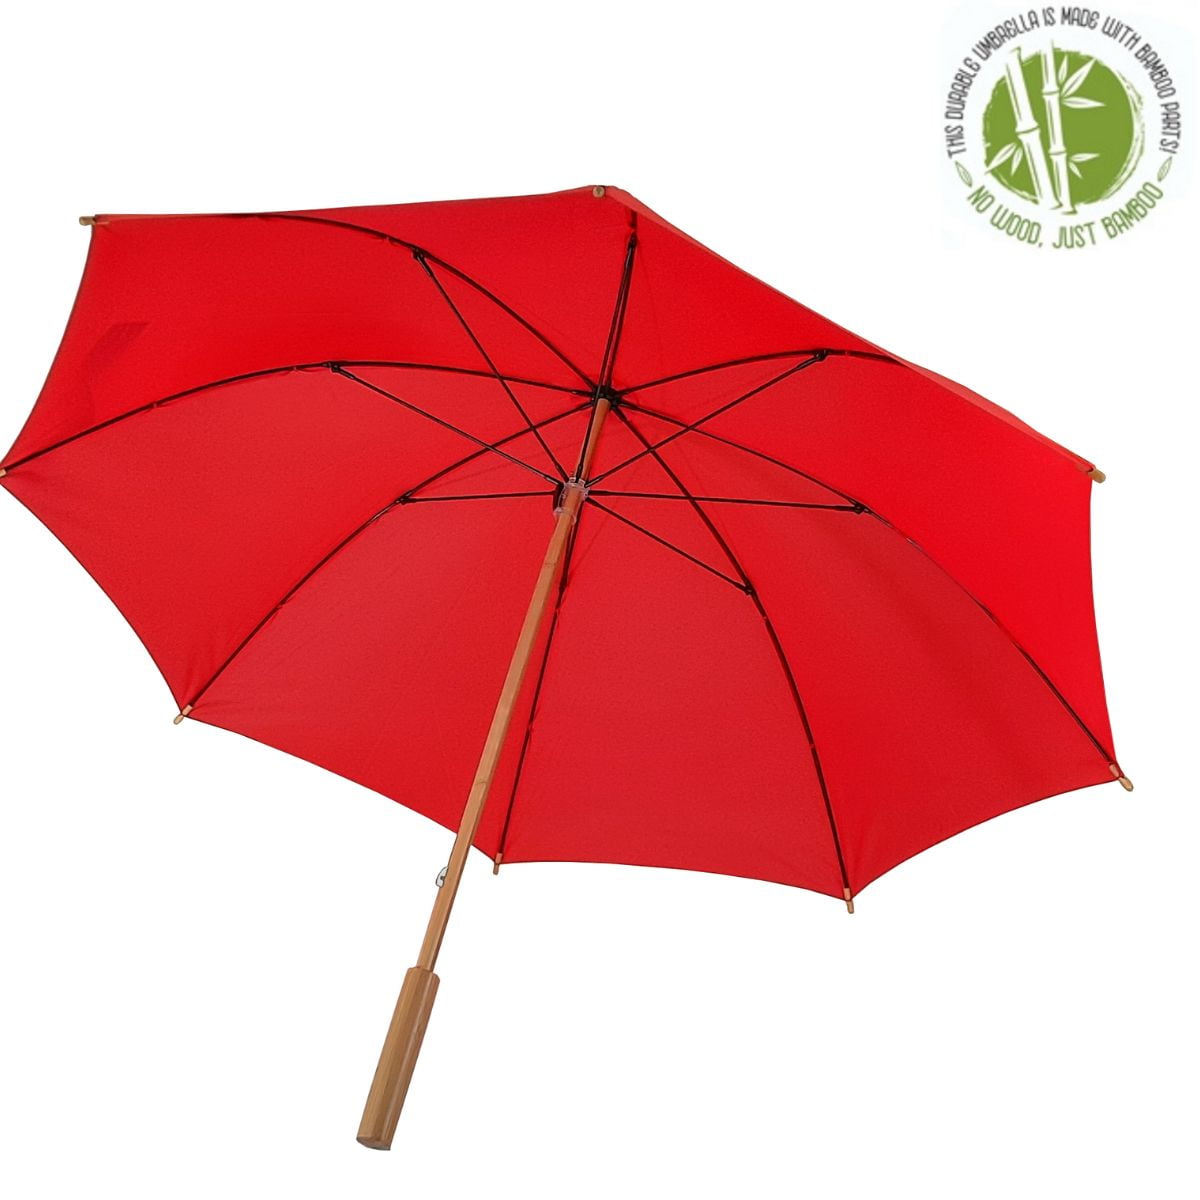 Red eco umbrella made from recycled PET and bamboo